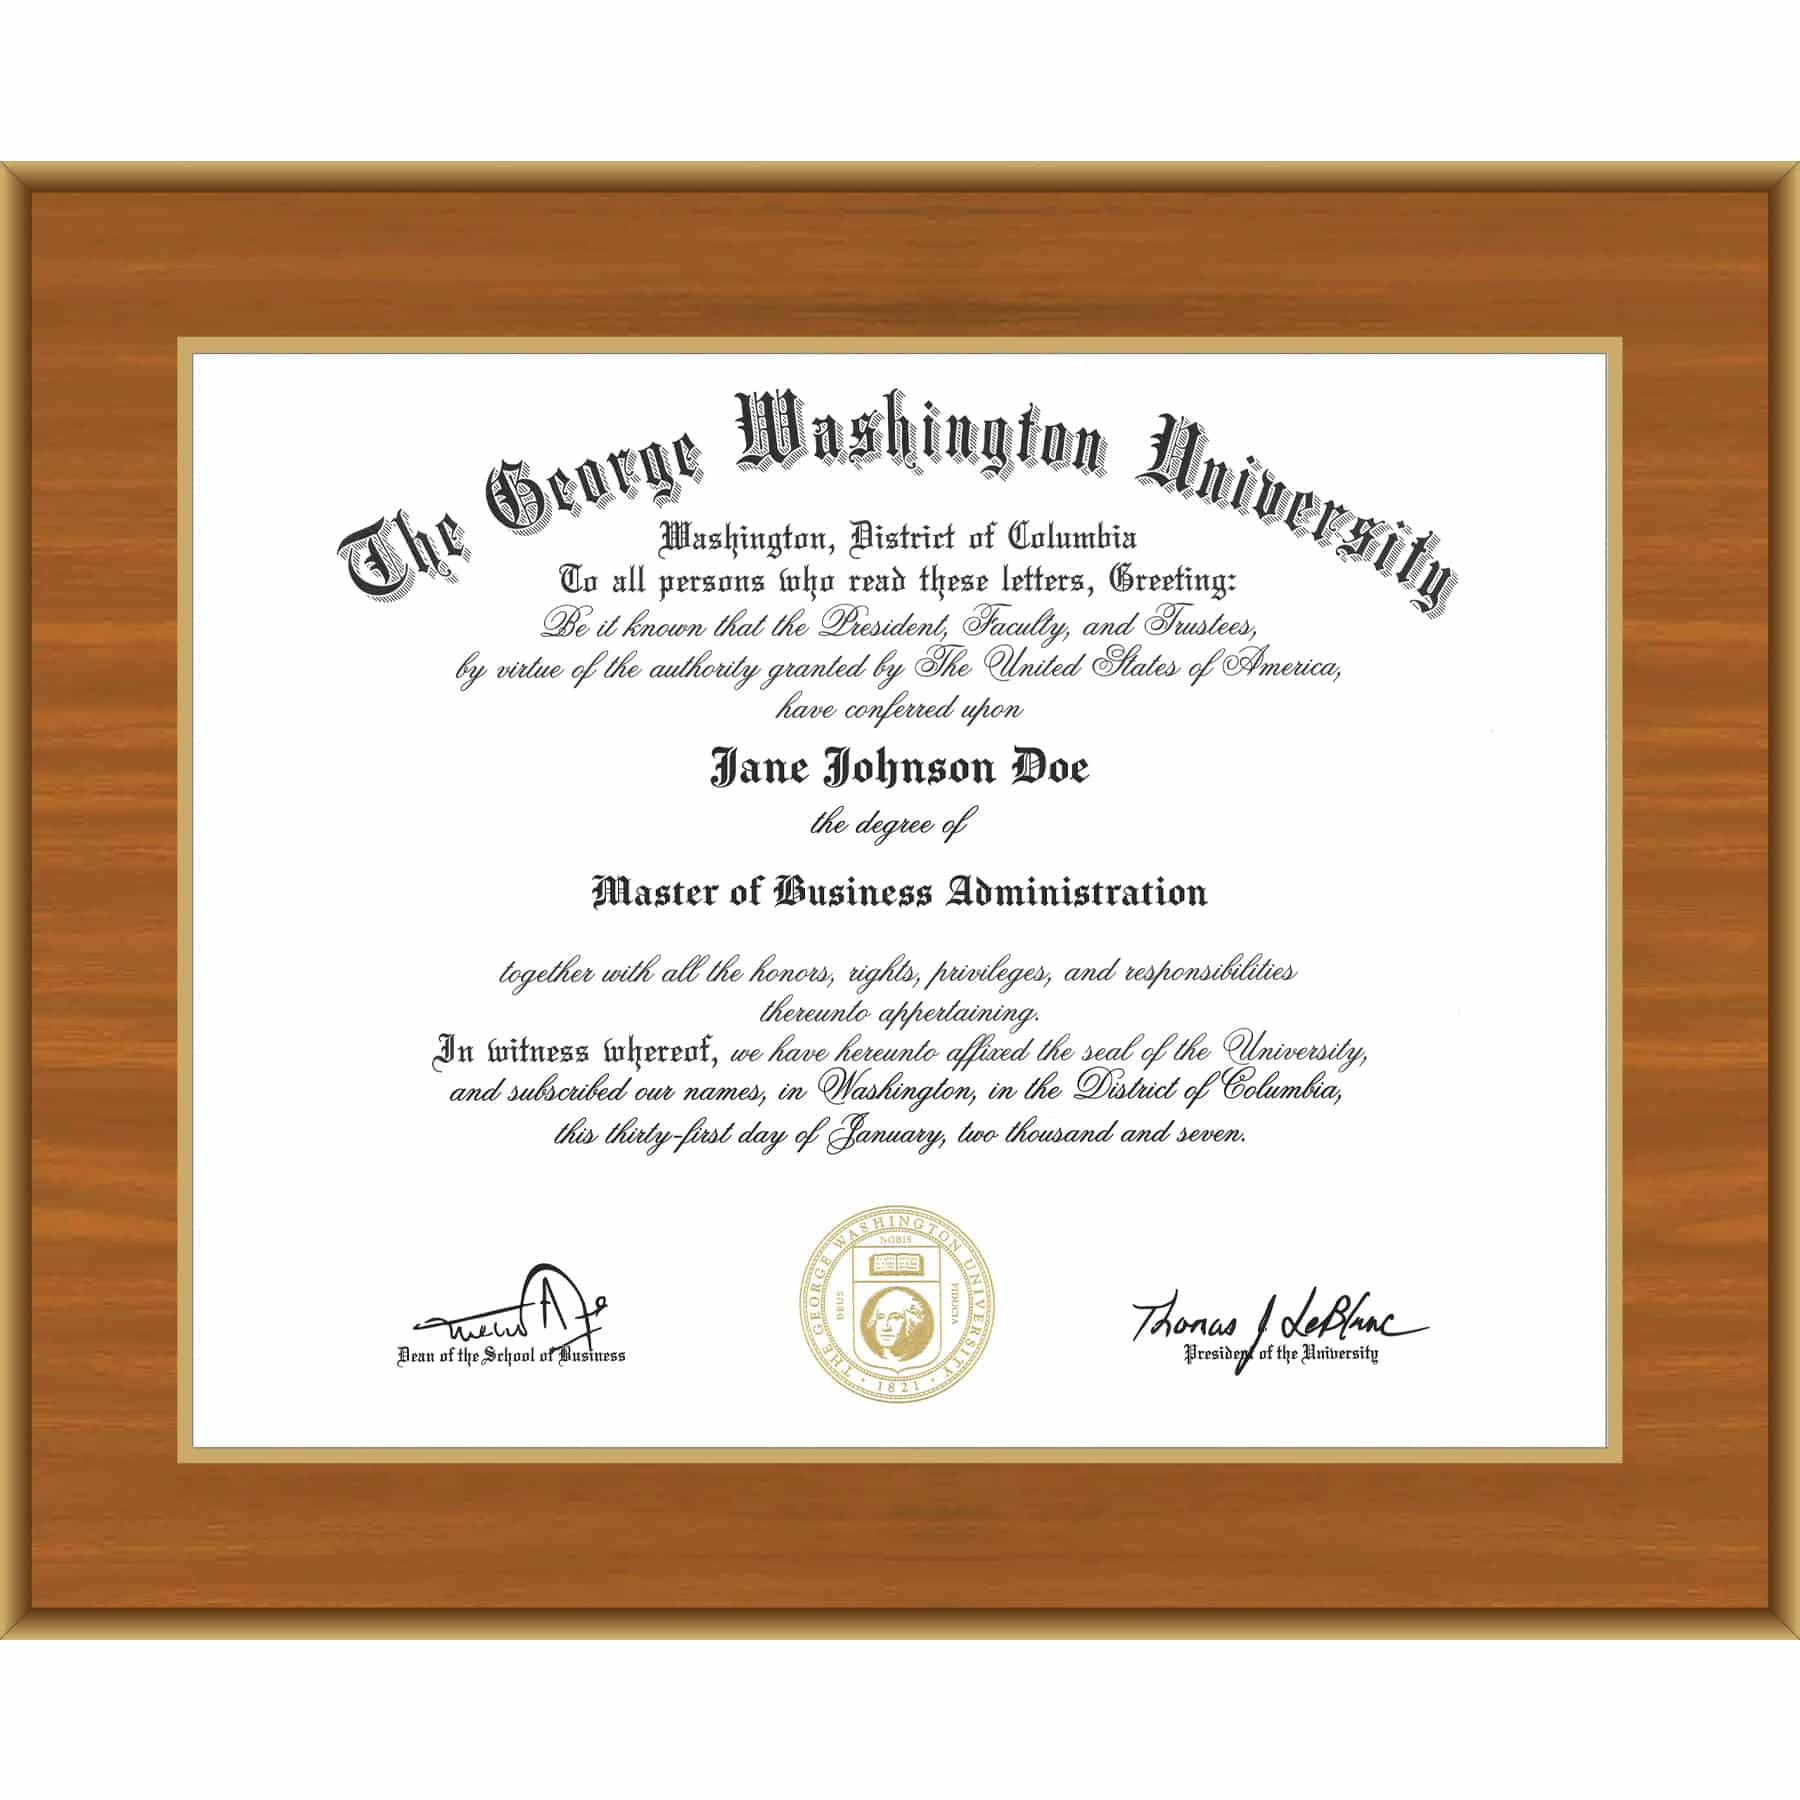 Maple wood plaque sample with gold border - diploma plaque laminators - Certificate plaques - Disclaimer Image